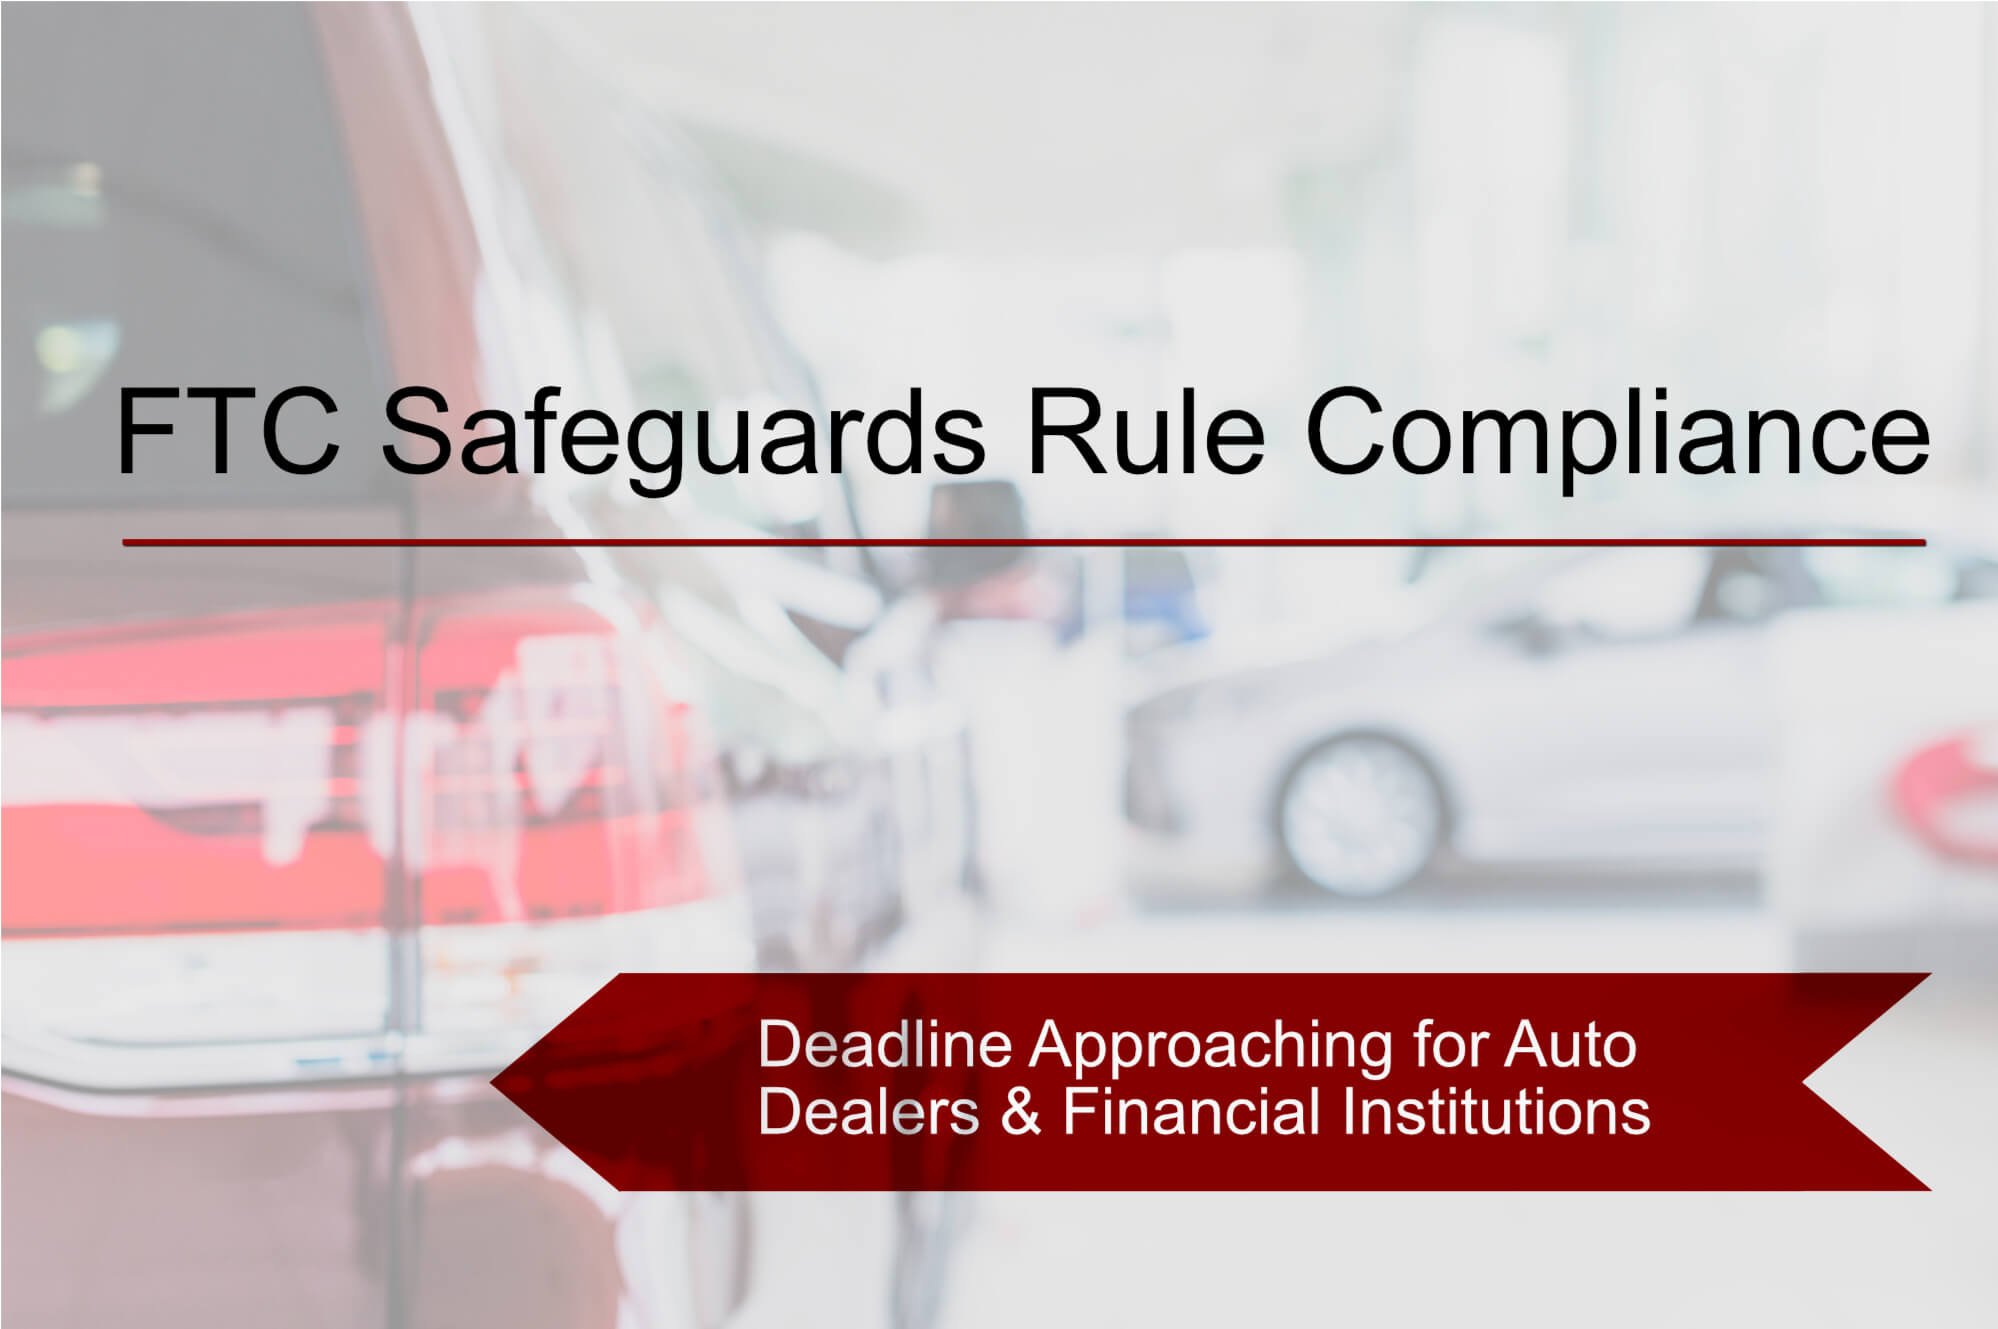 FTC Safeguards Rule and compliance requirements for Automobile Dealerships